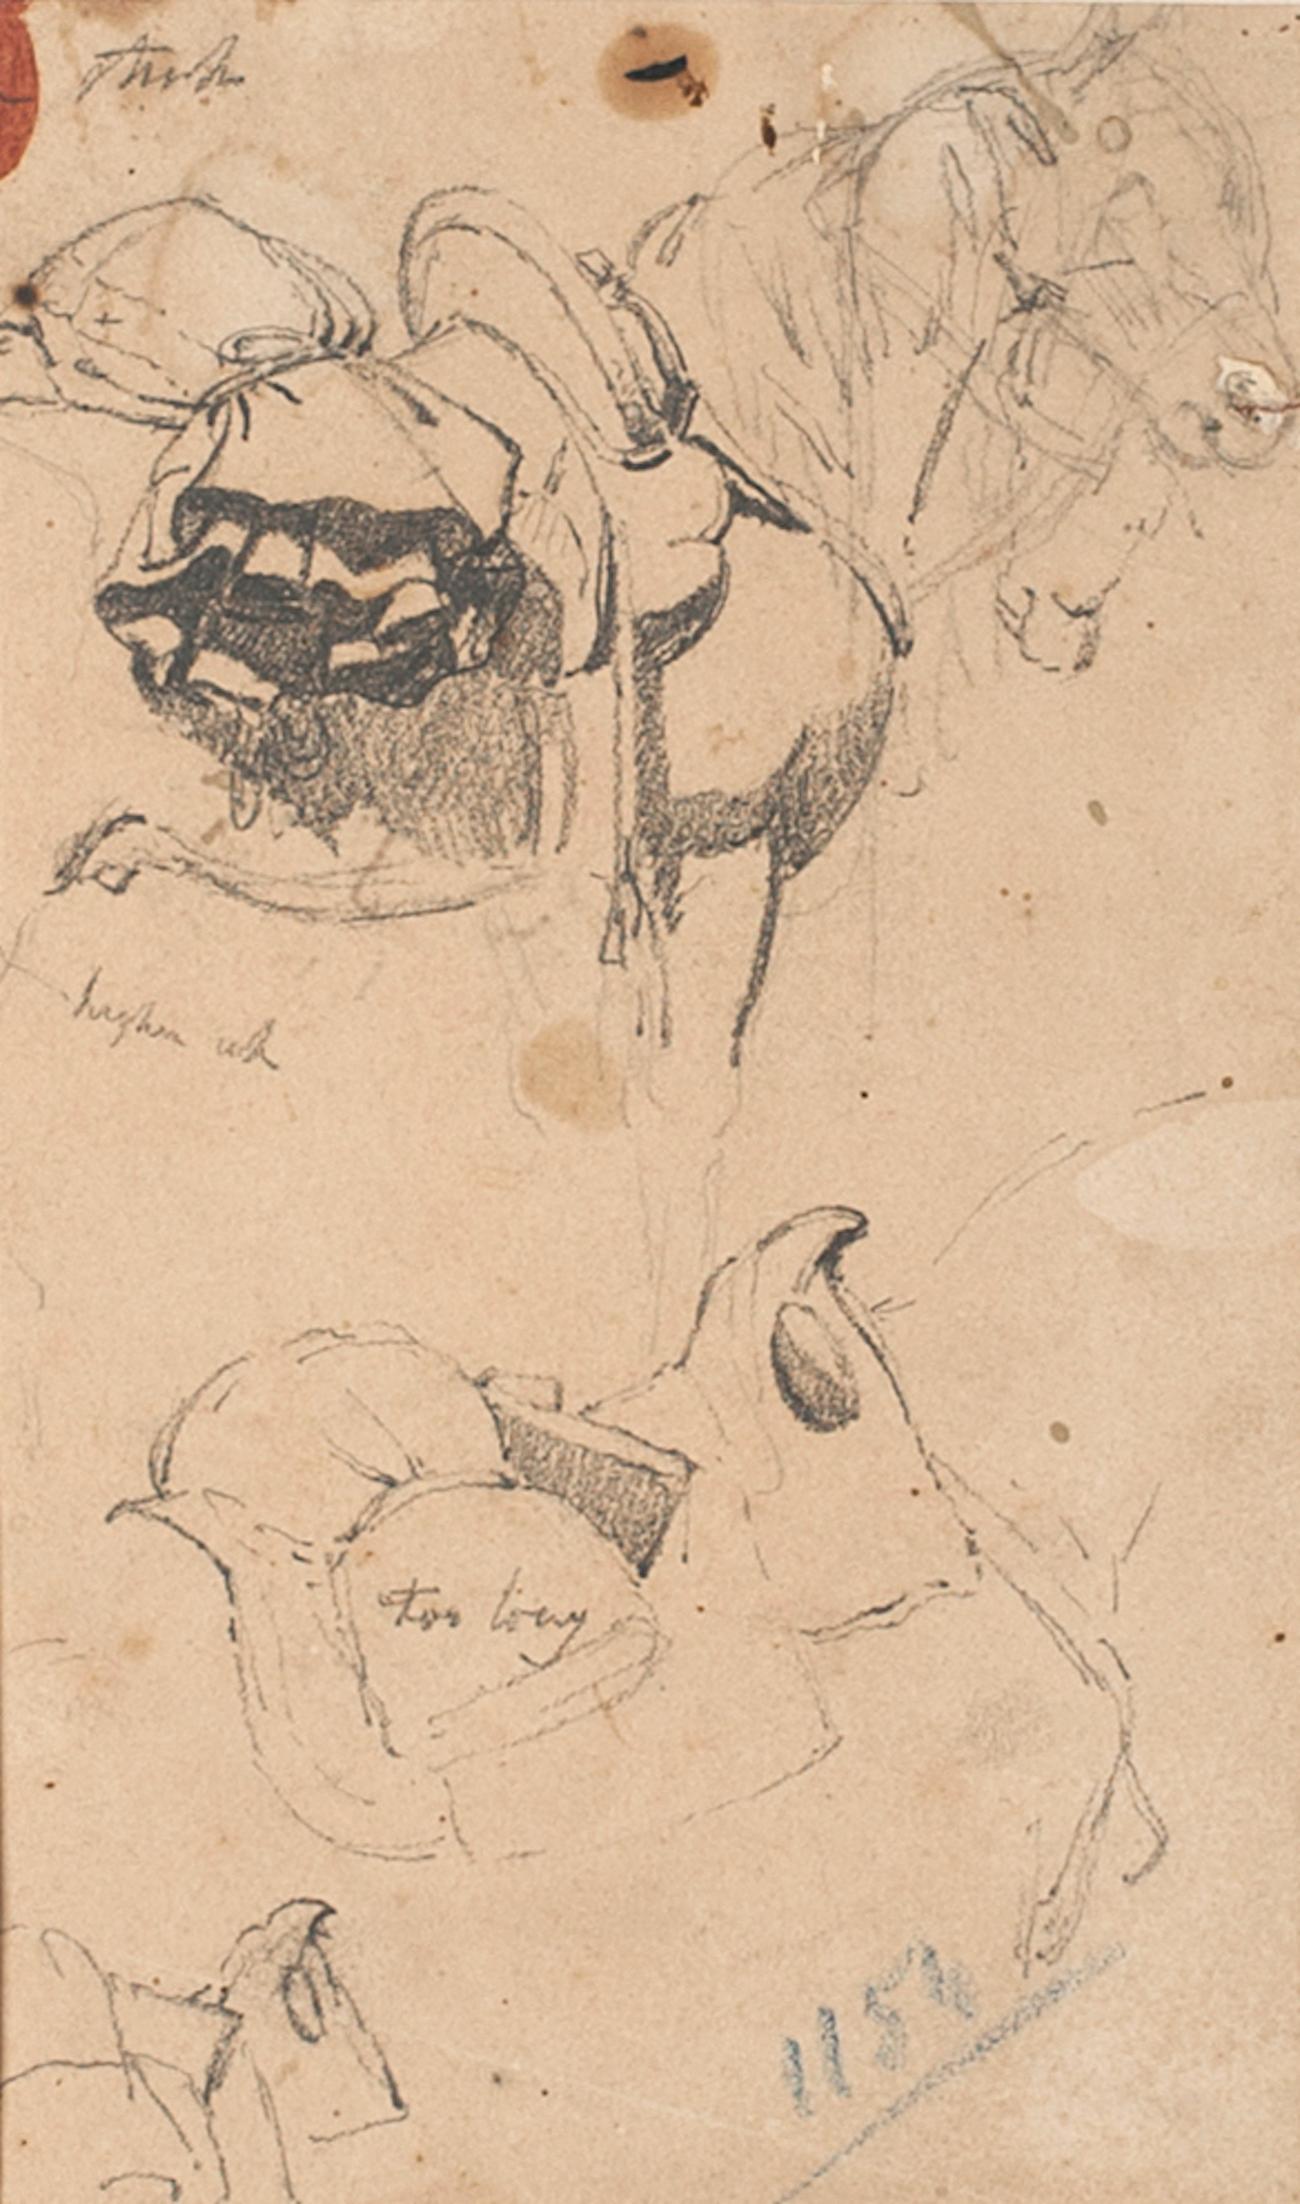 Carlo Coleman Figurative Art - Study for Horses - Original Pen Drawing on Paper by Charles Coleman - 1850